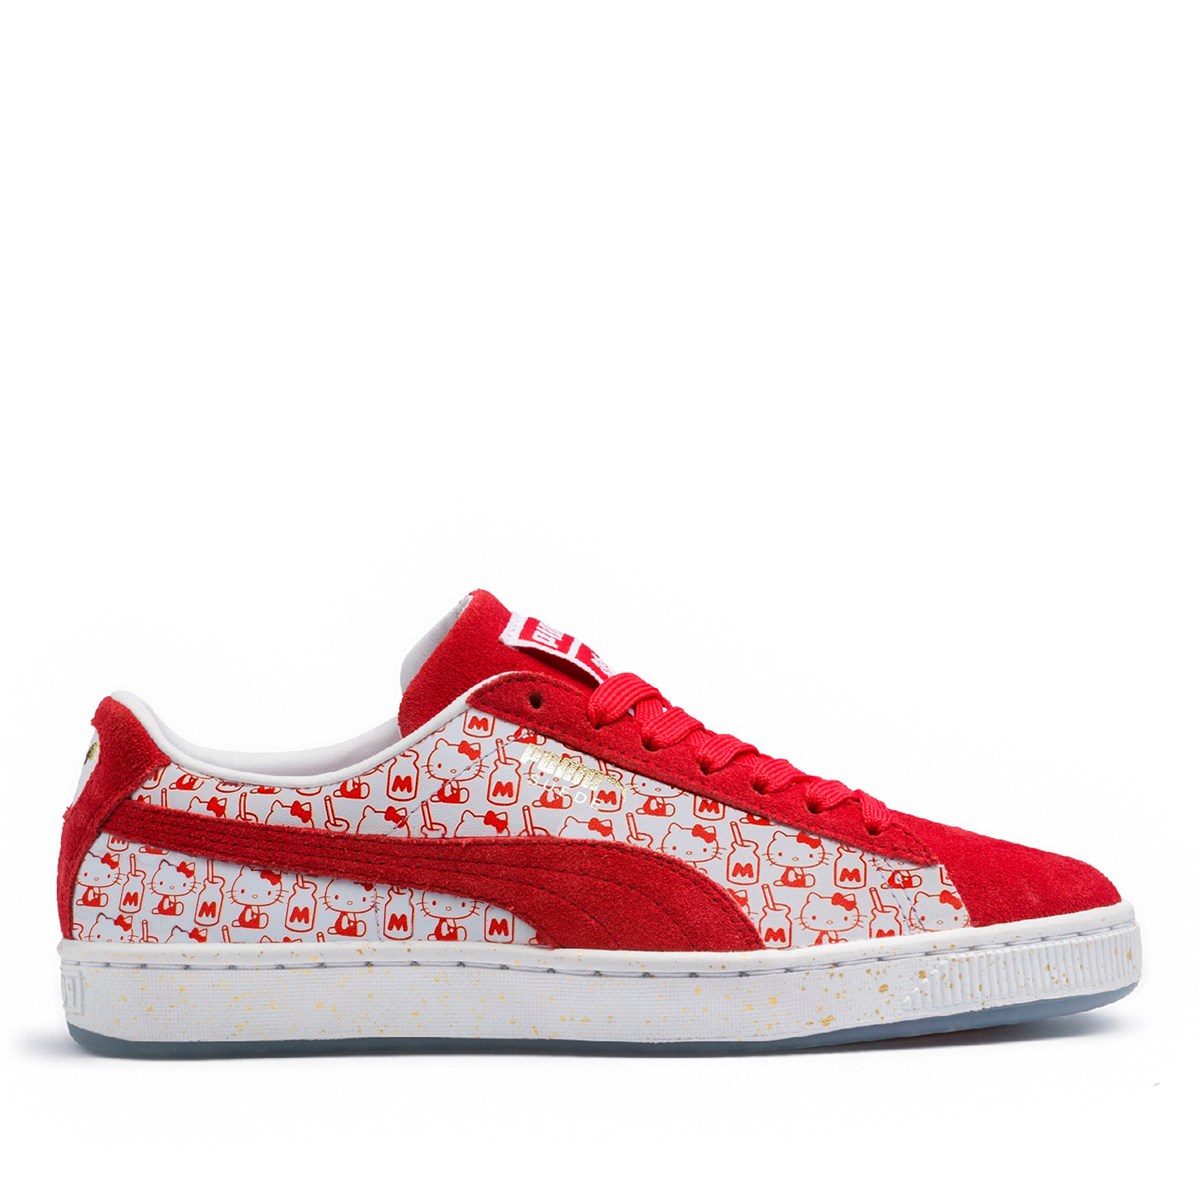 Puma Suede X Hello Kitty Sneakers 